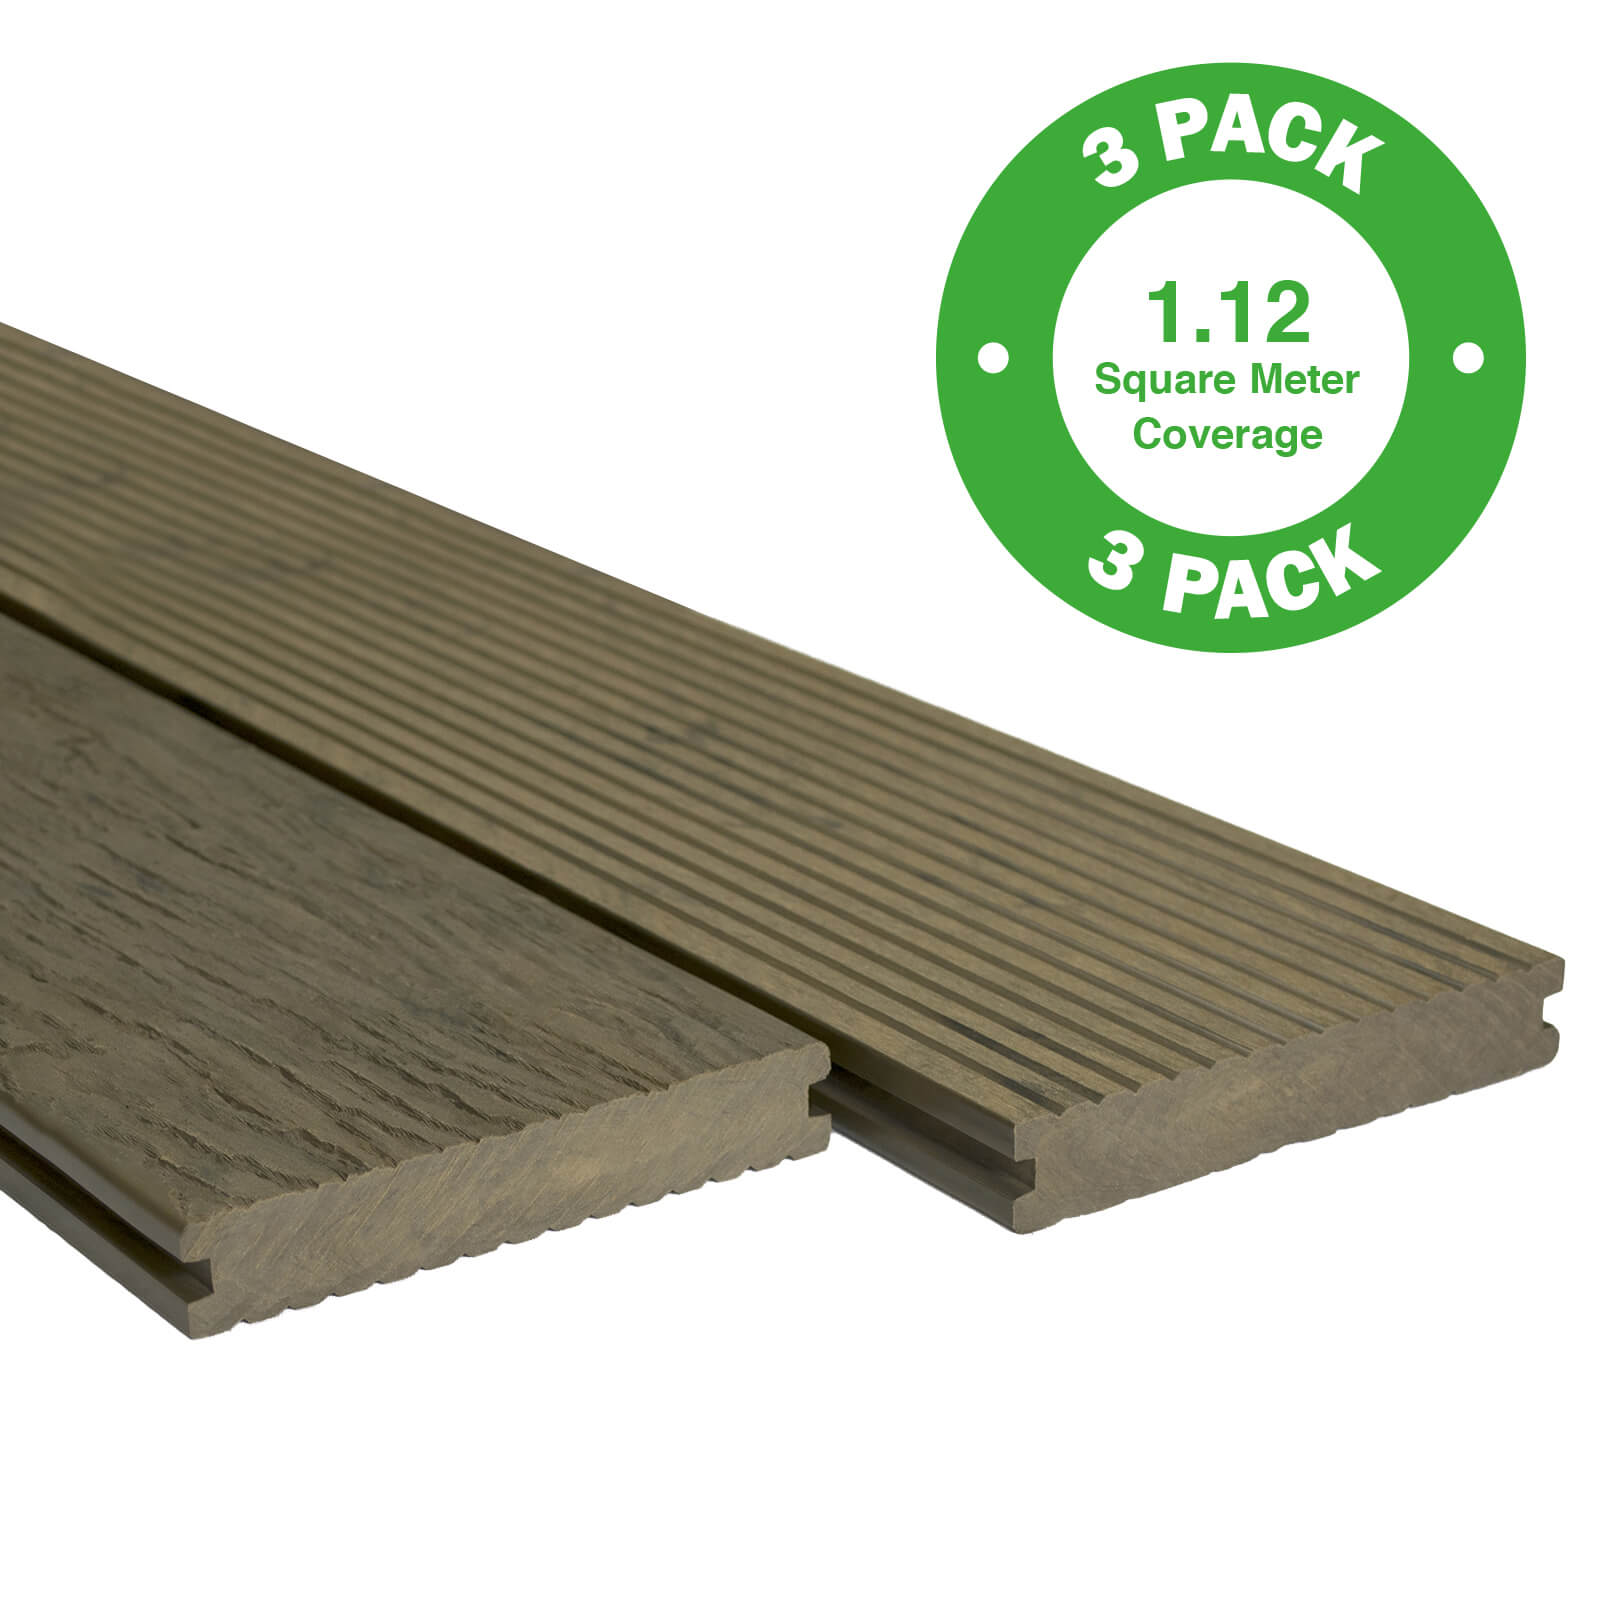 Photo of Heritage Board Composite Decking - 3 Pack - Oak - 1.12 M2